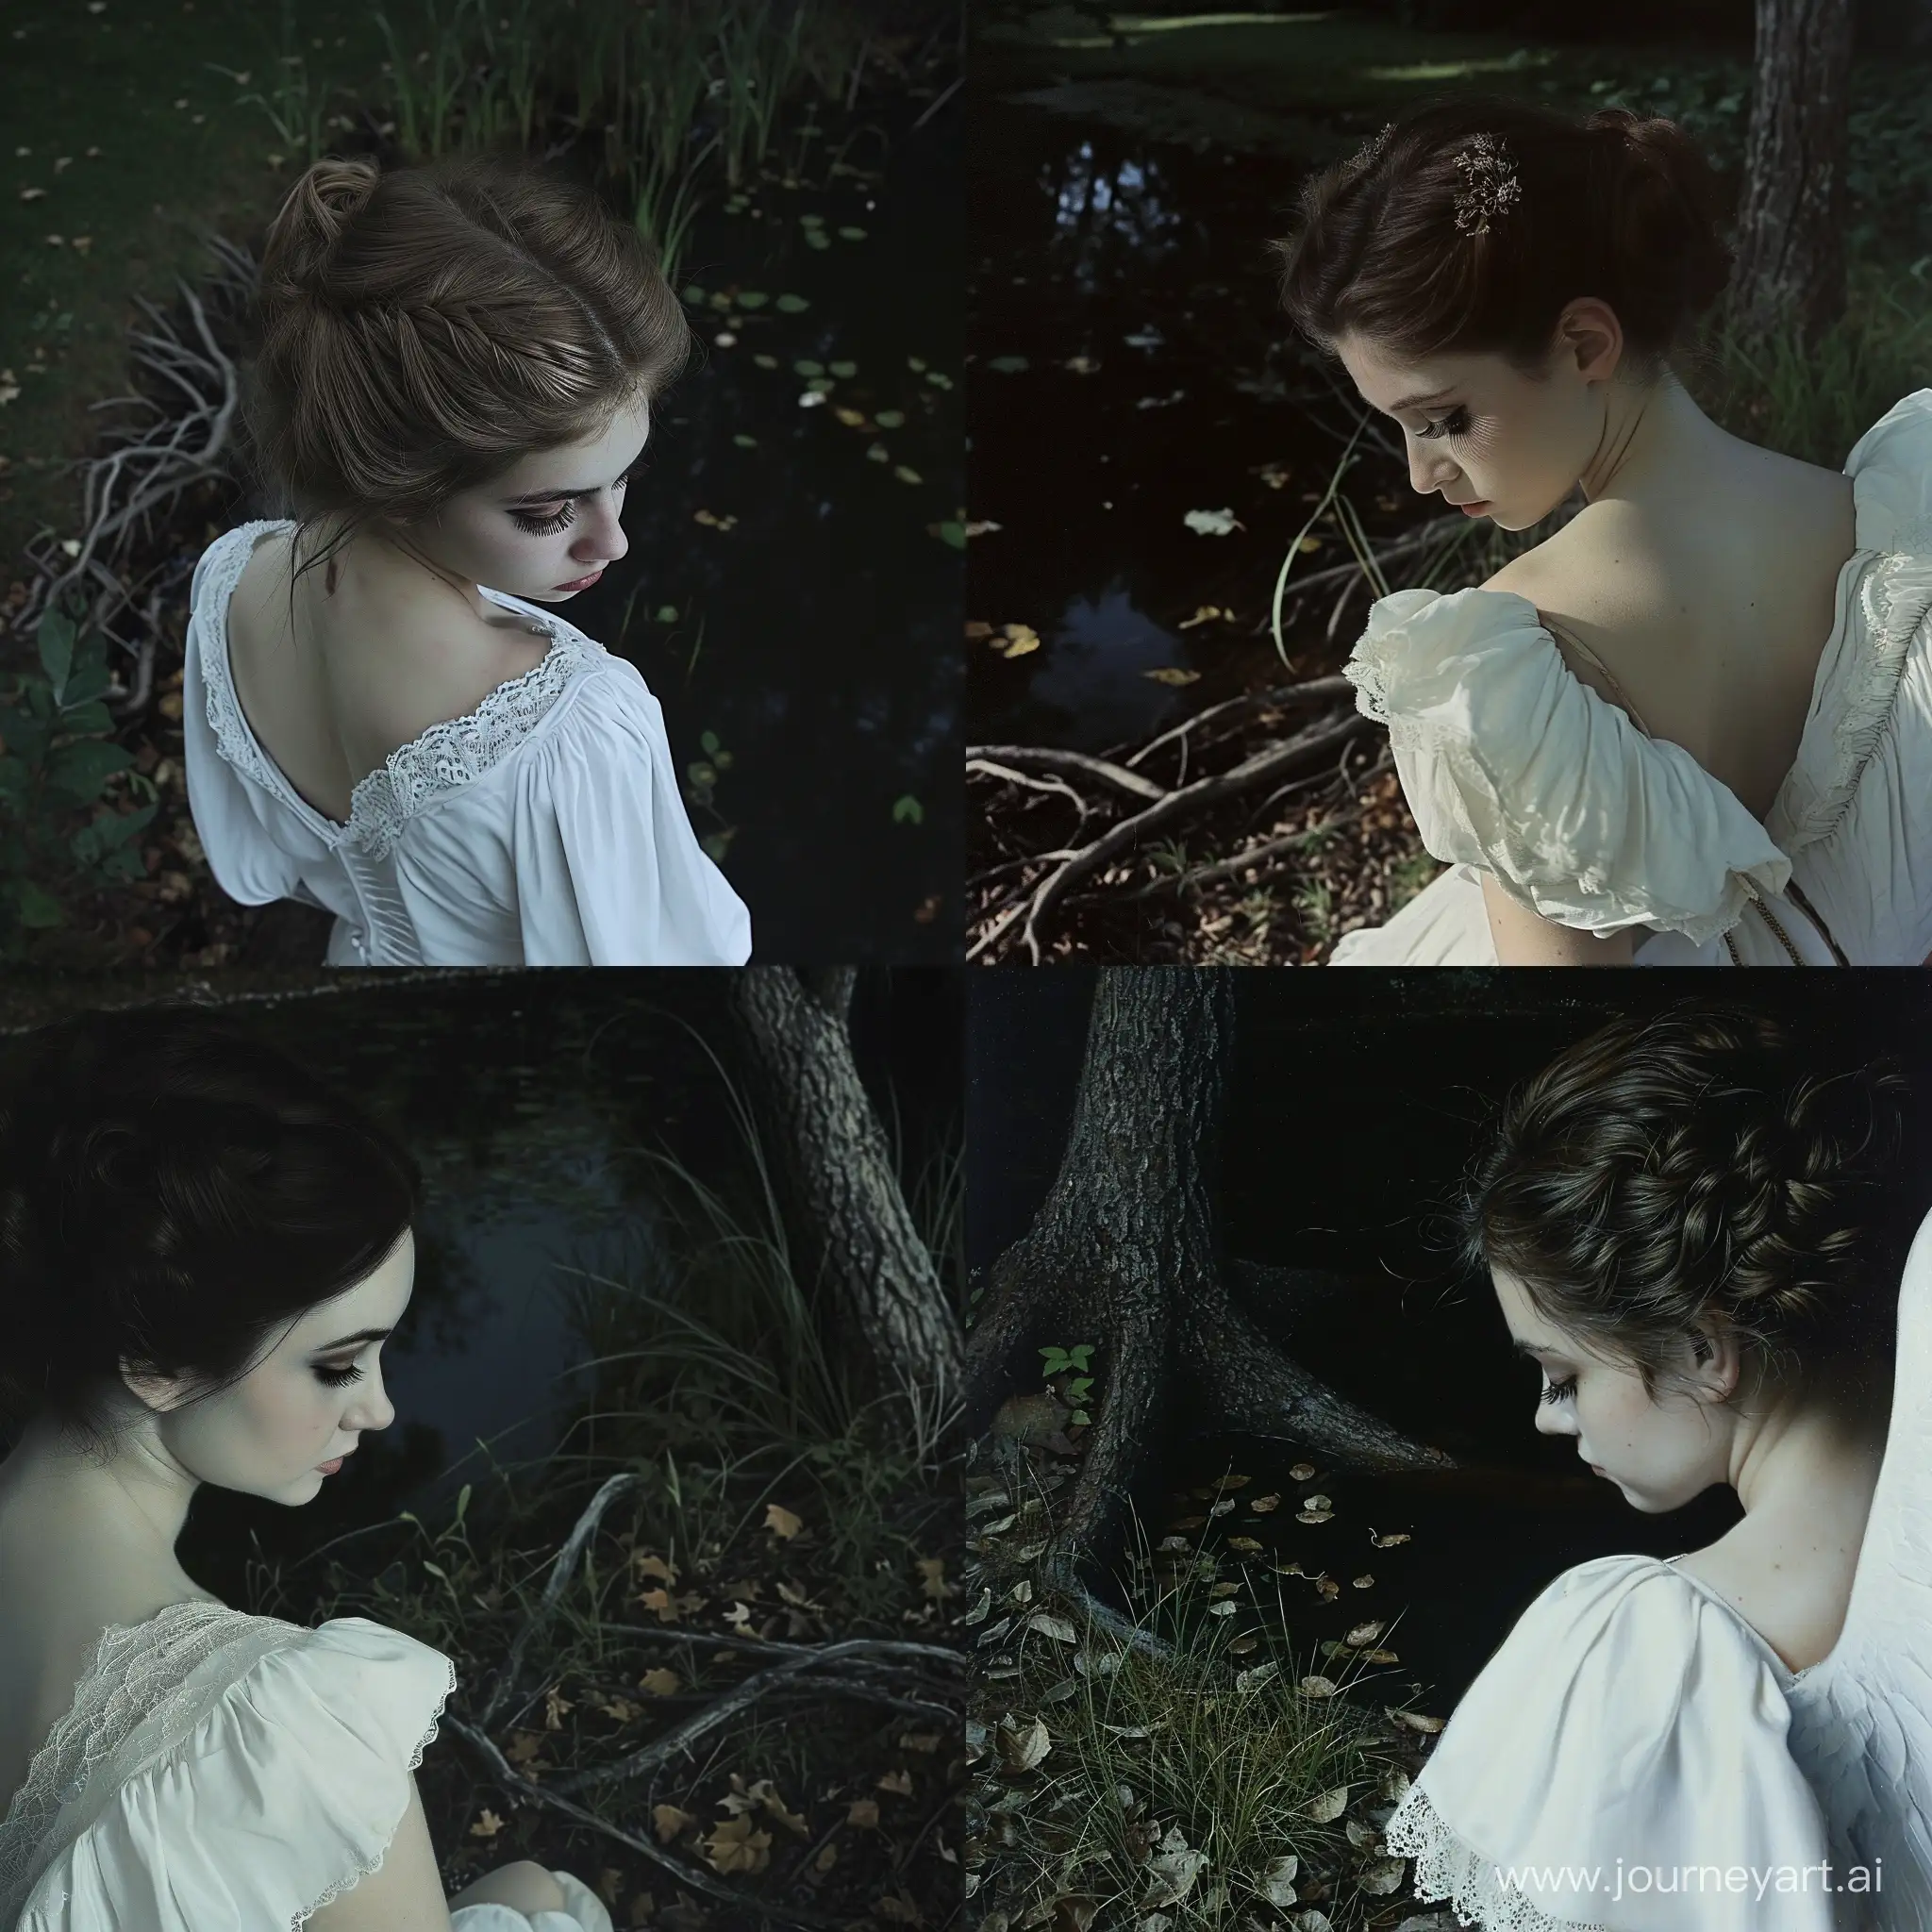 (((Angel's back))) , her head slightly turned towards the camera, eyelashes, ((gaze directed down)), (pre-Raphaelite style: 1.3 ) , white dress, near the pond, darkness, Ivan Nikolaevich Kramsky style, grass, tree roots, leaves on the ground, ((Ivan Nikolaevich Kramsky style))